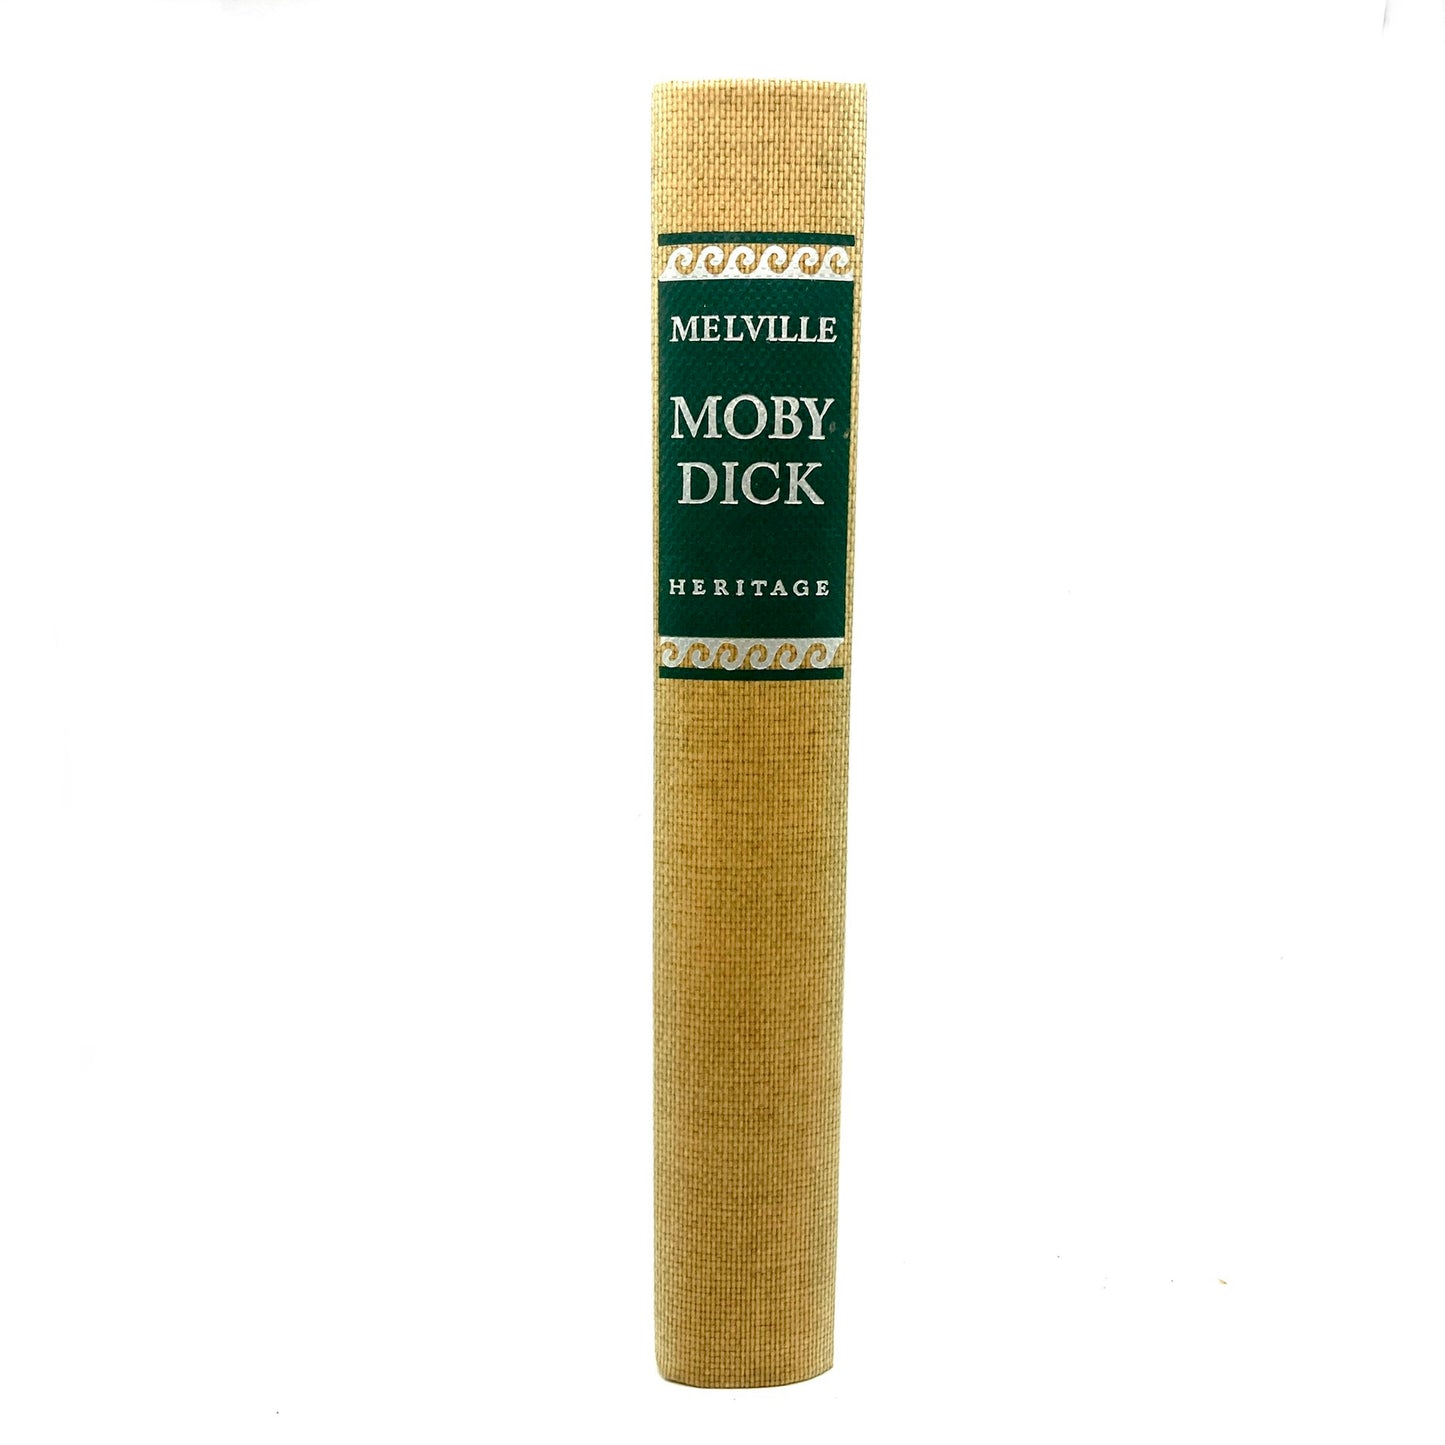 MELVILLE, Herman "Moby Dick" [Heritage Press, 1943] - Buzz Bookstore